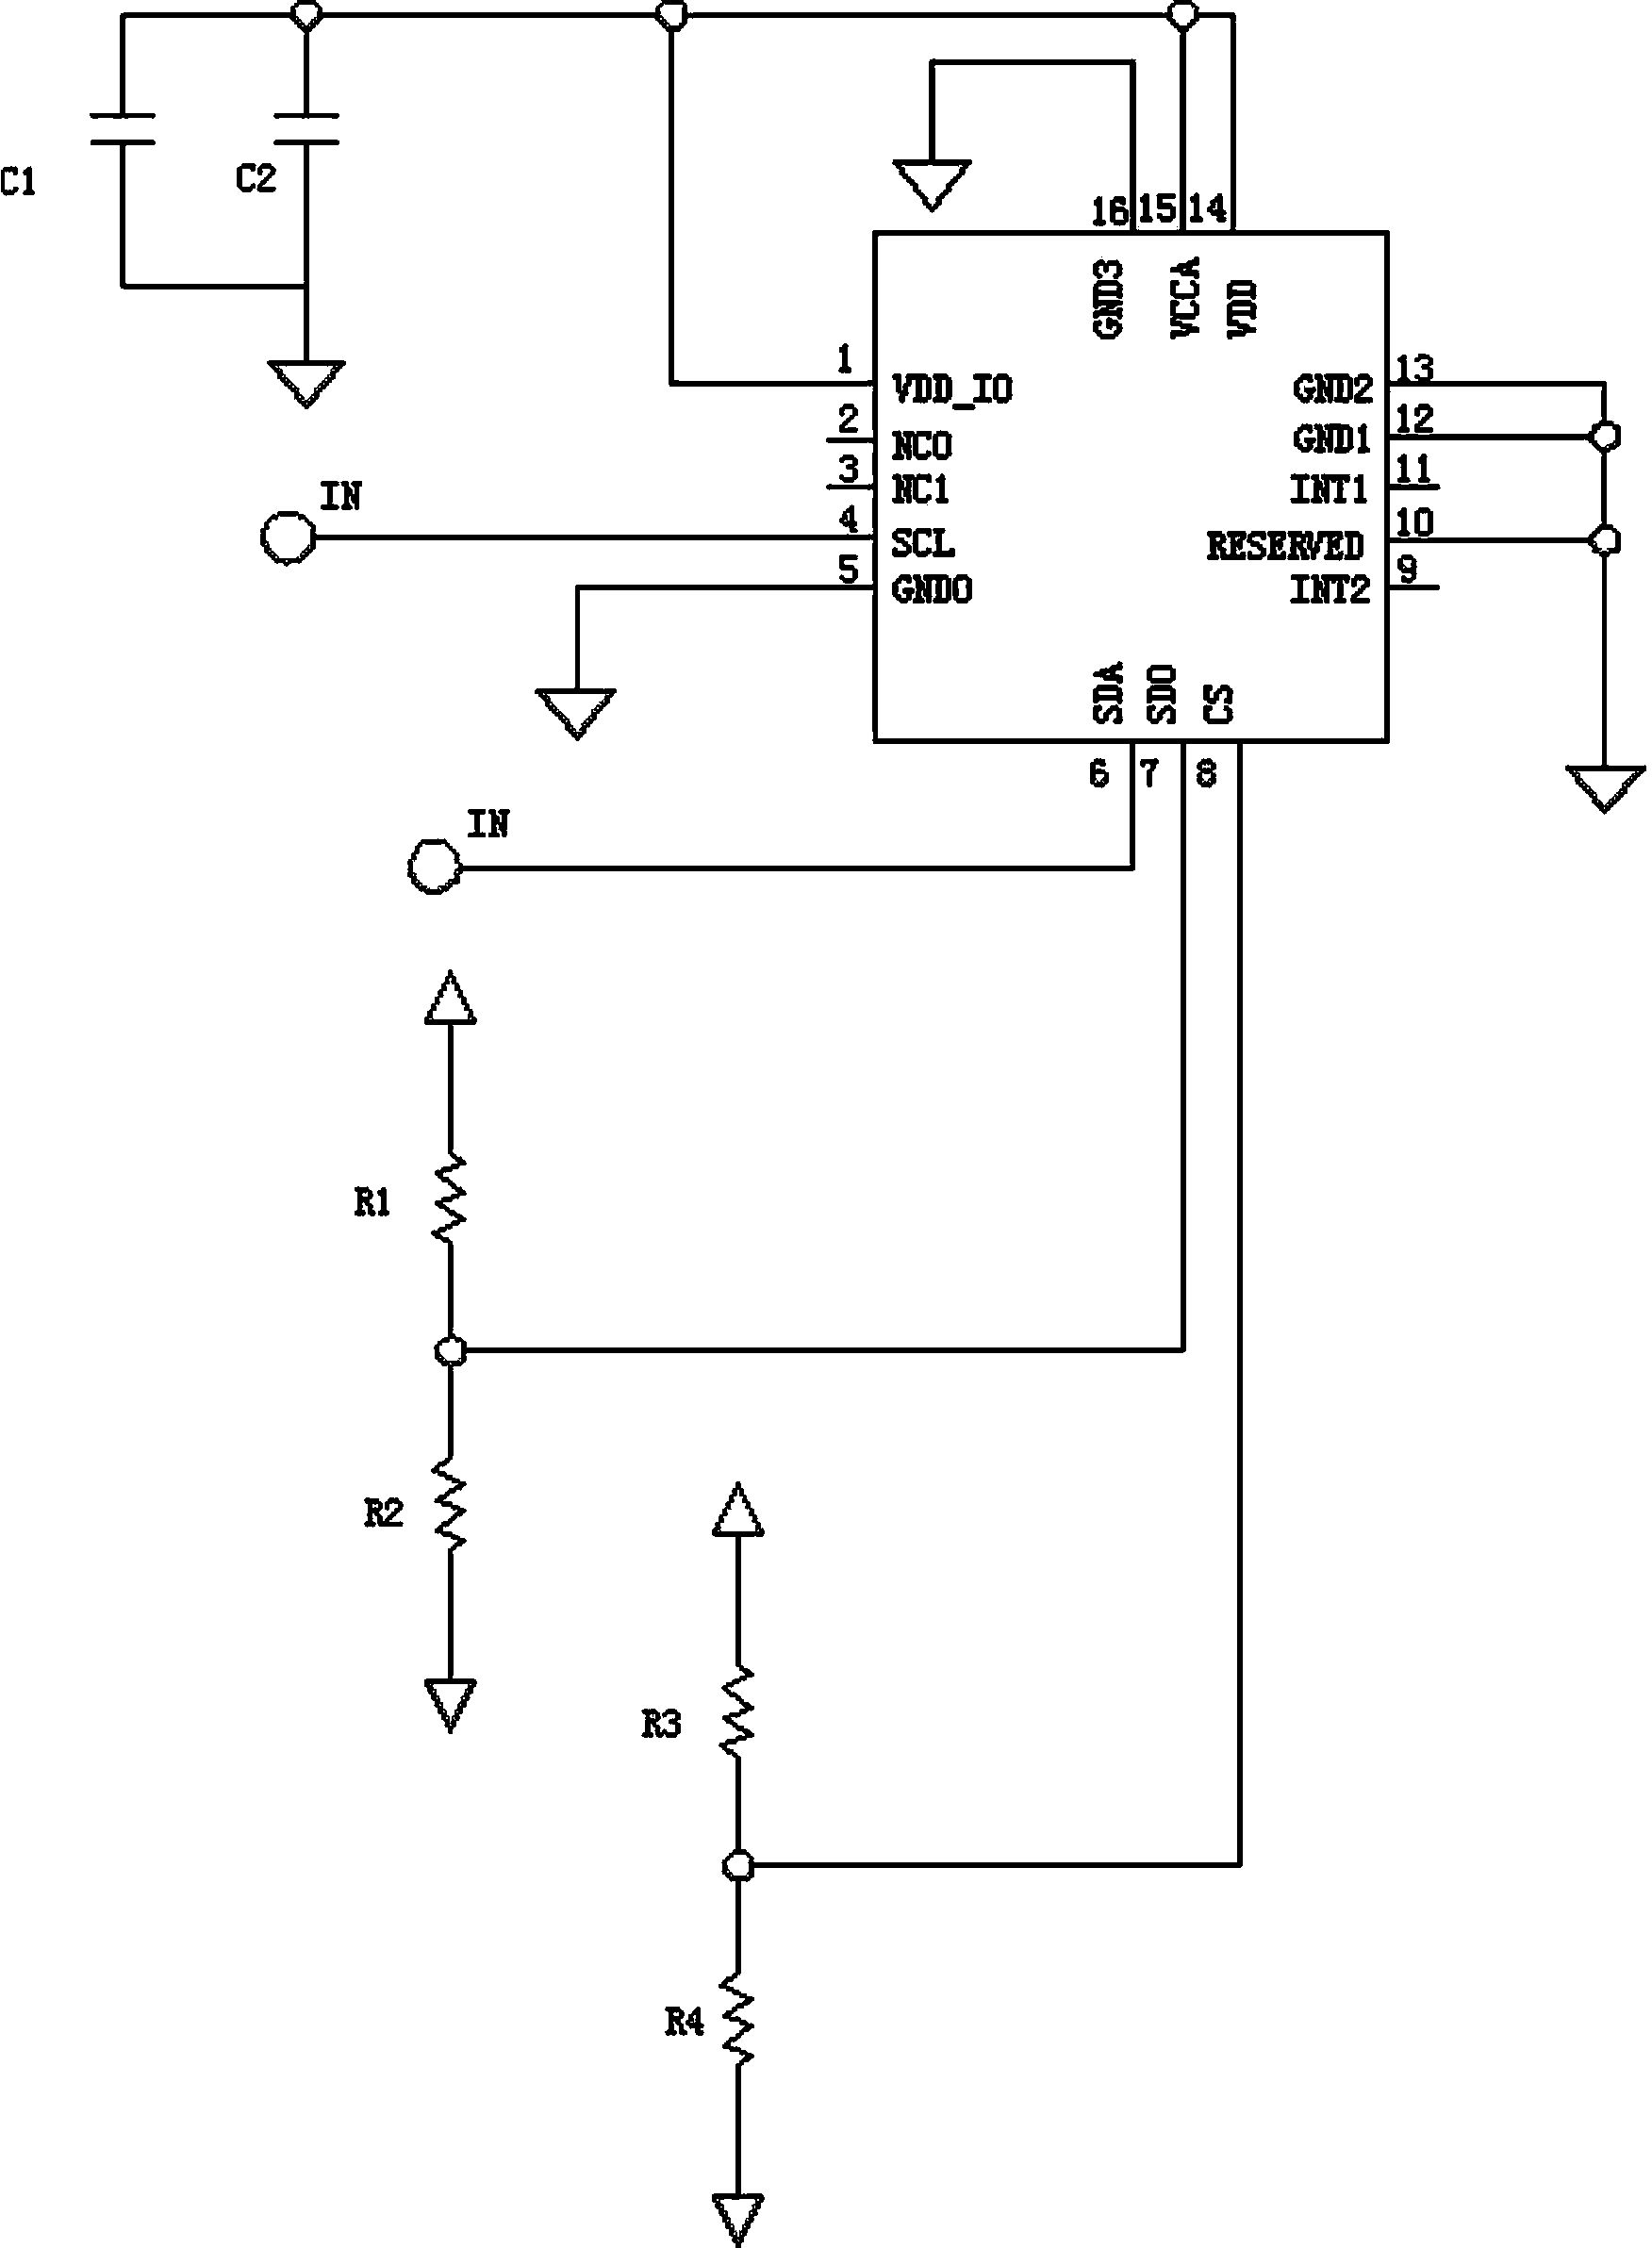 Method for performing server cooling through atmospheric pressure changes